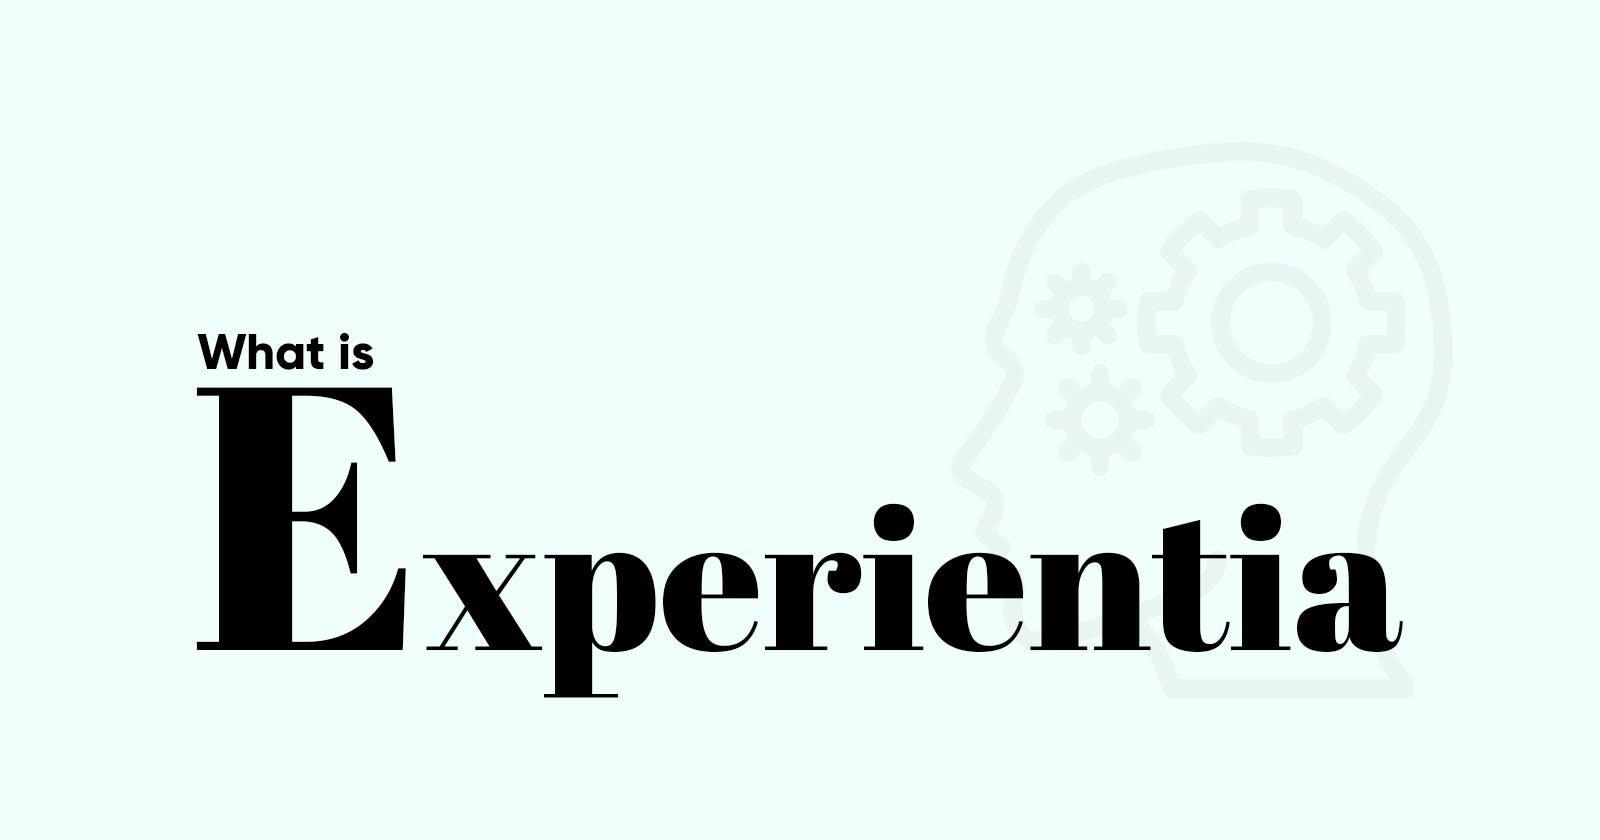 What is Experientia?